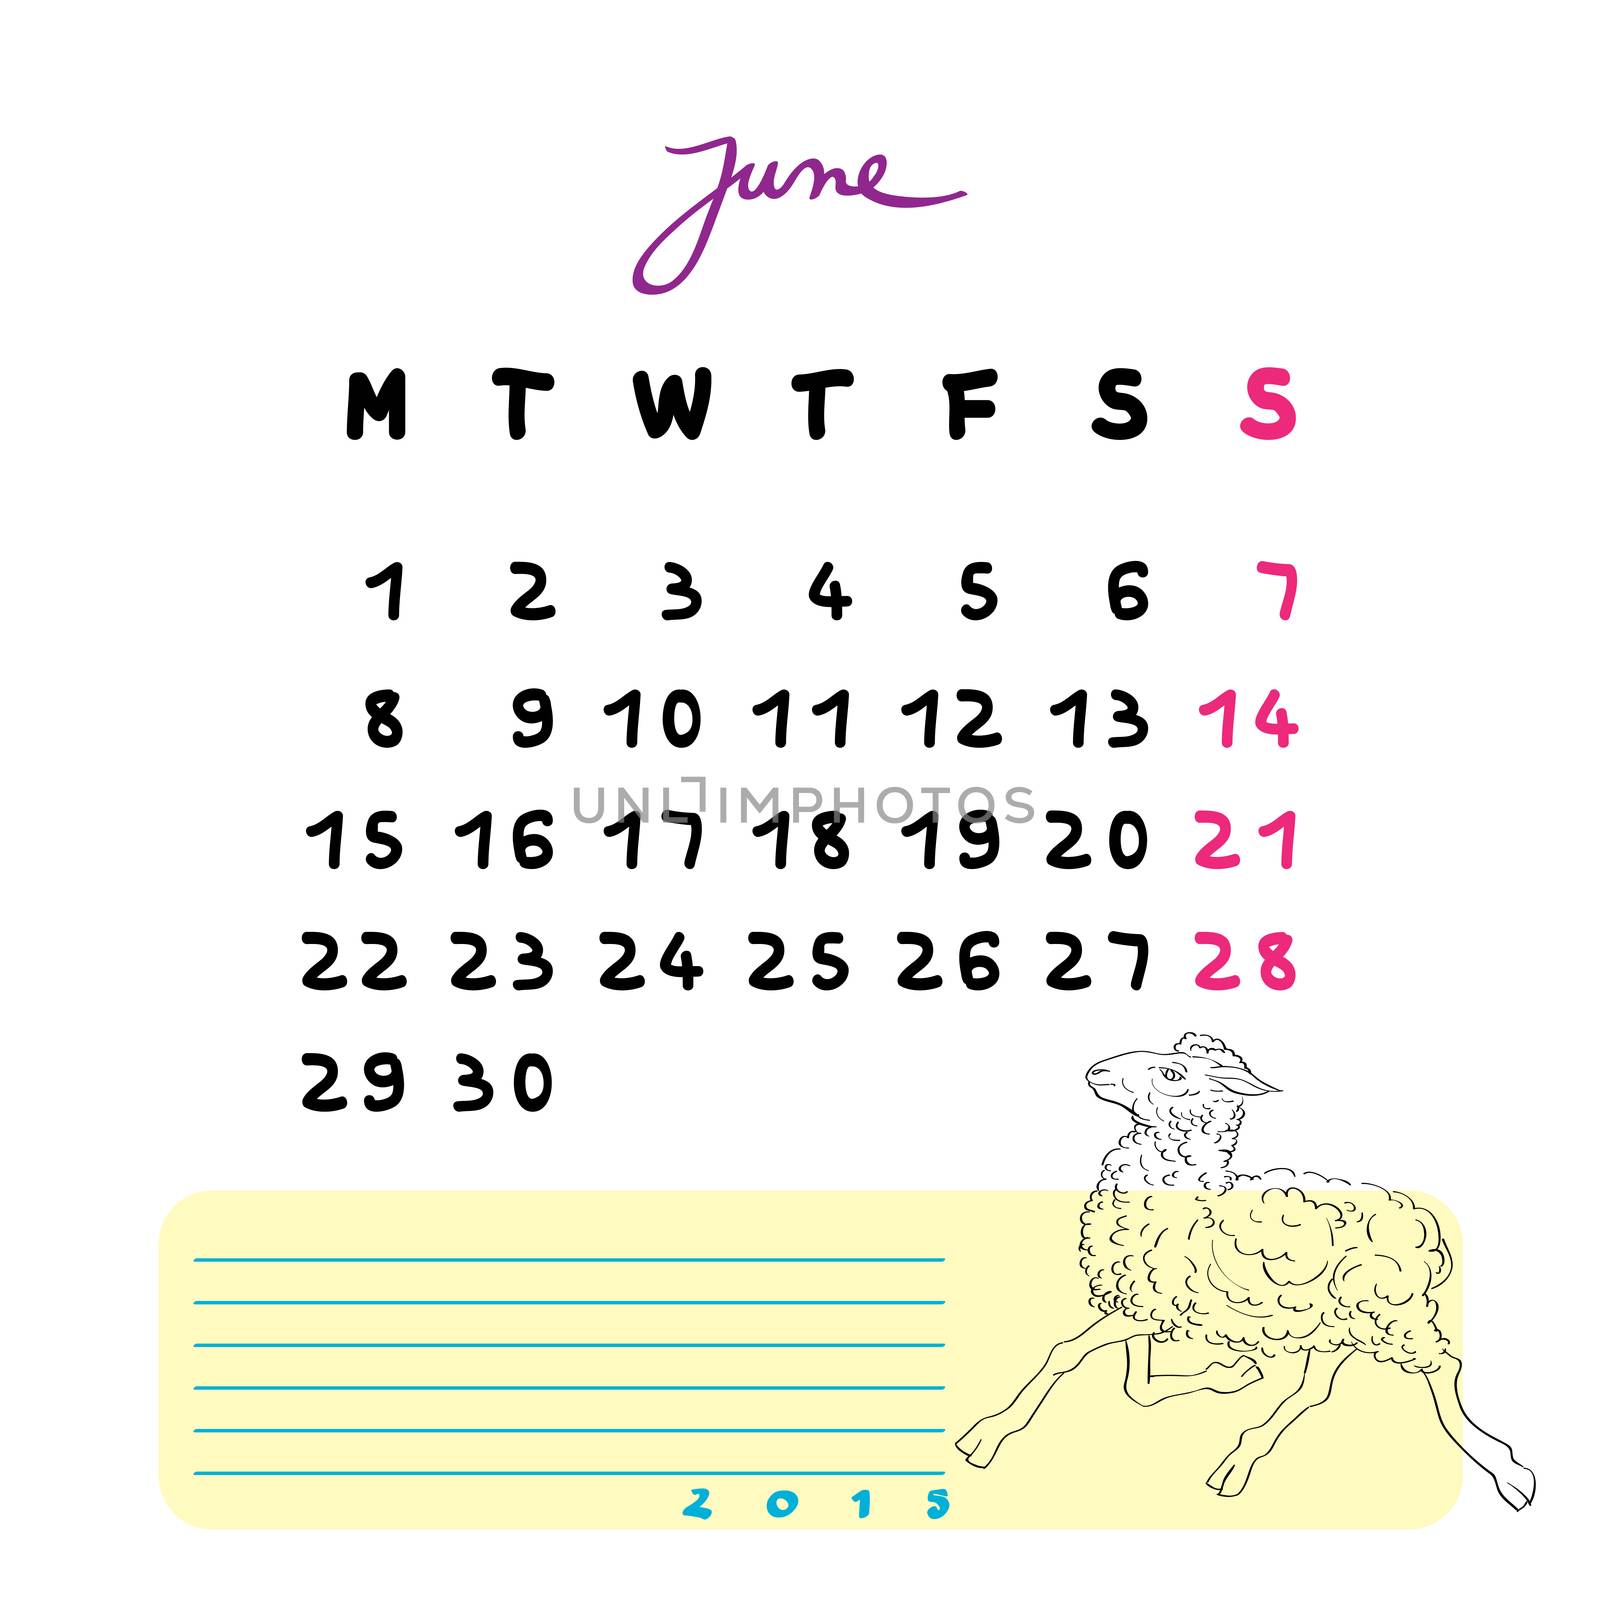 Calendar 2015 page illustration with sheep doodle and notes section over white, June